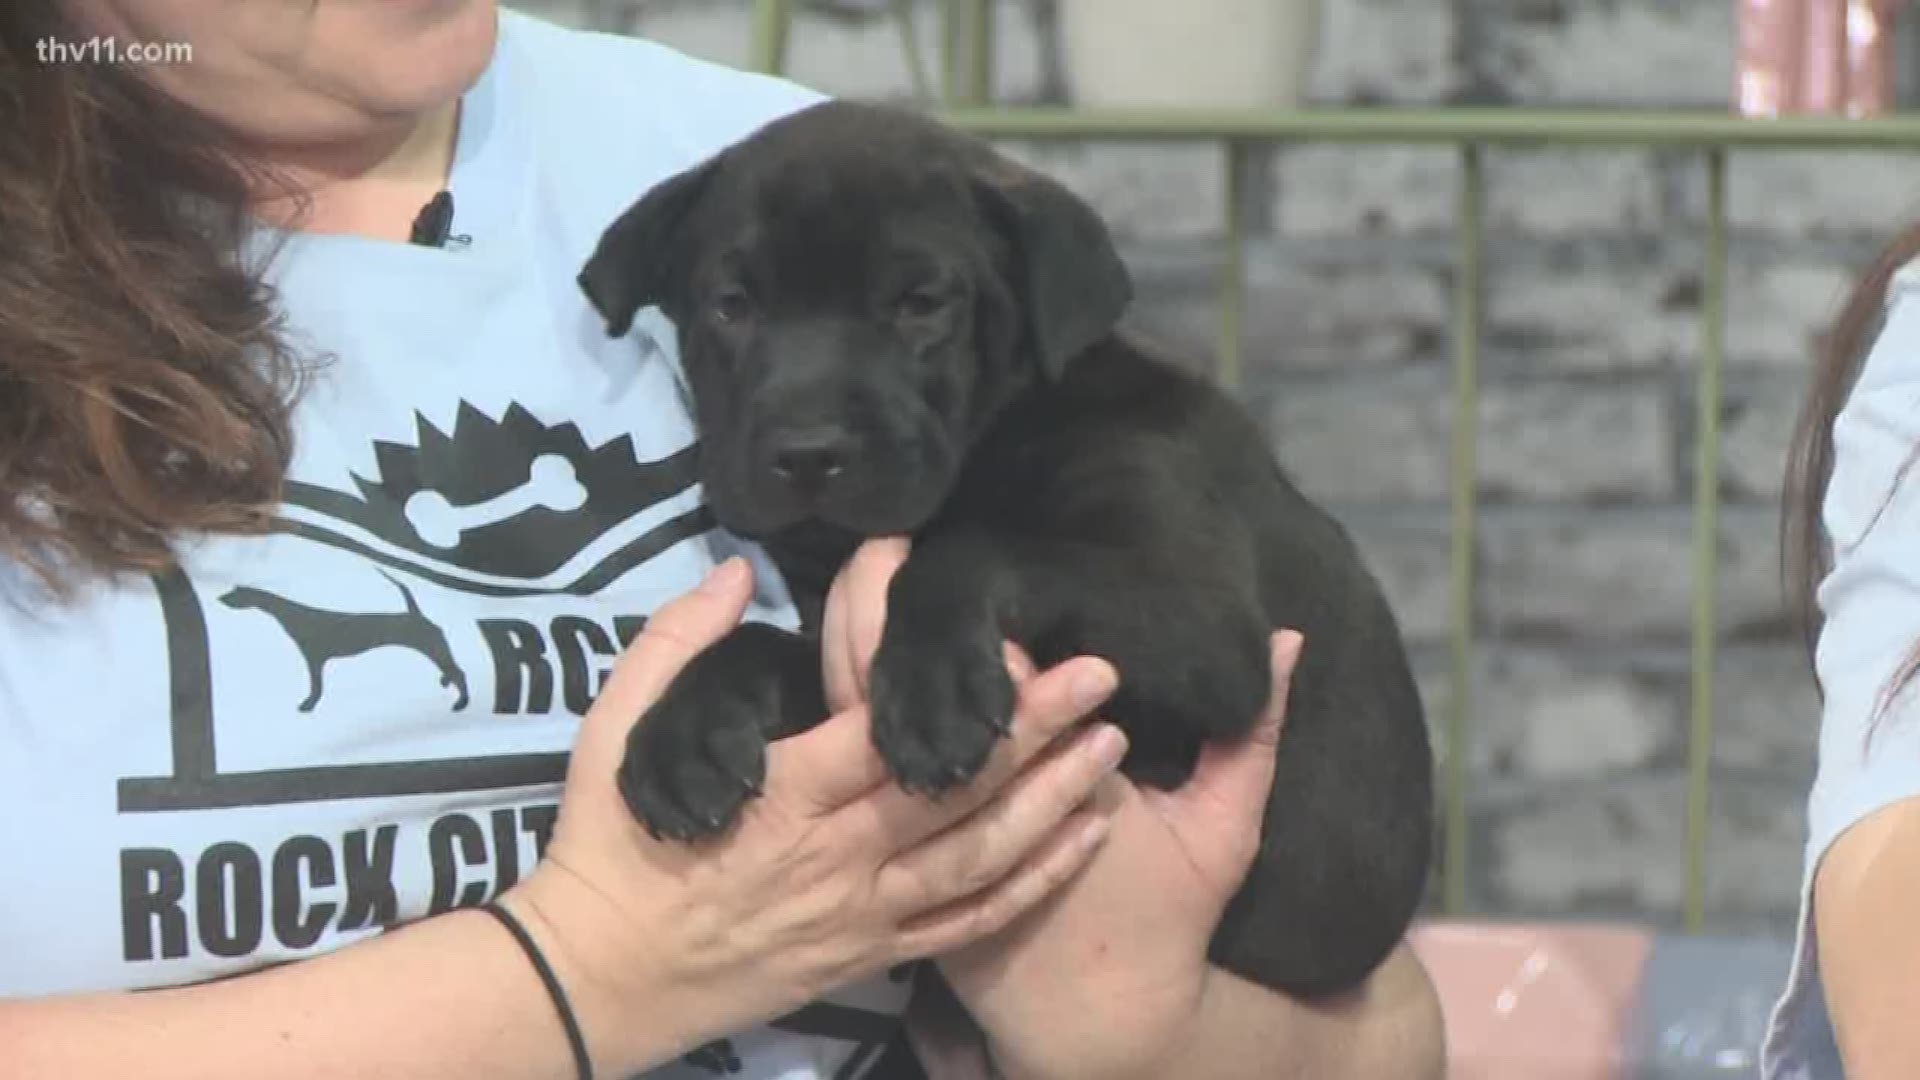 Rock City Rescue stopped by The Vine with two adorable puppies. Both are up for adoption.